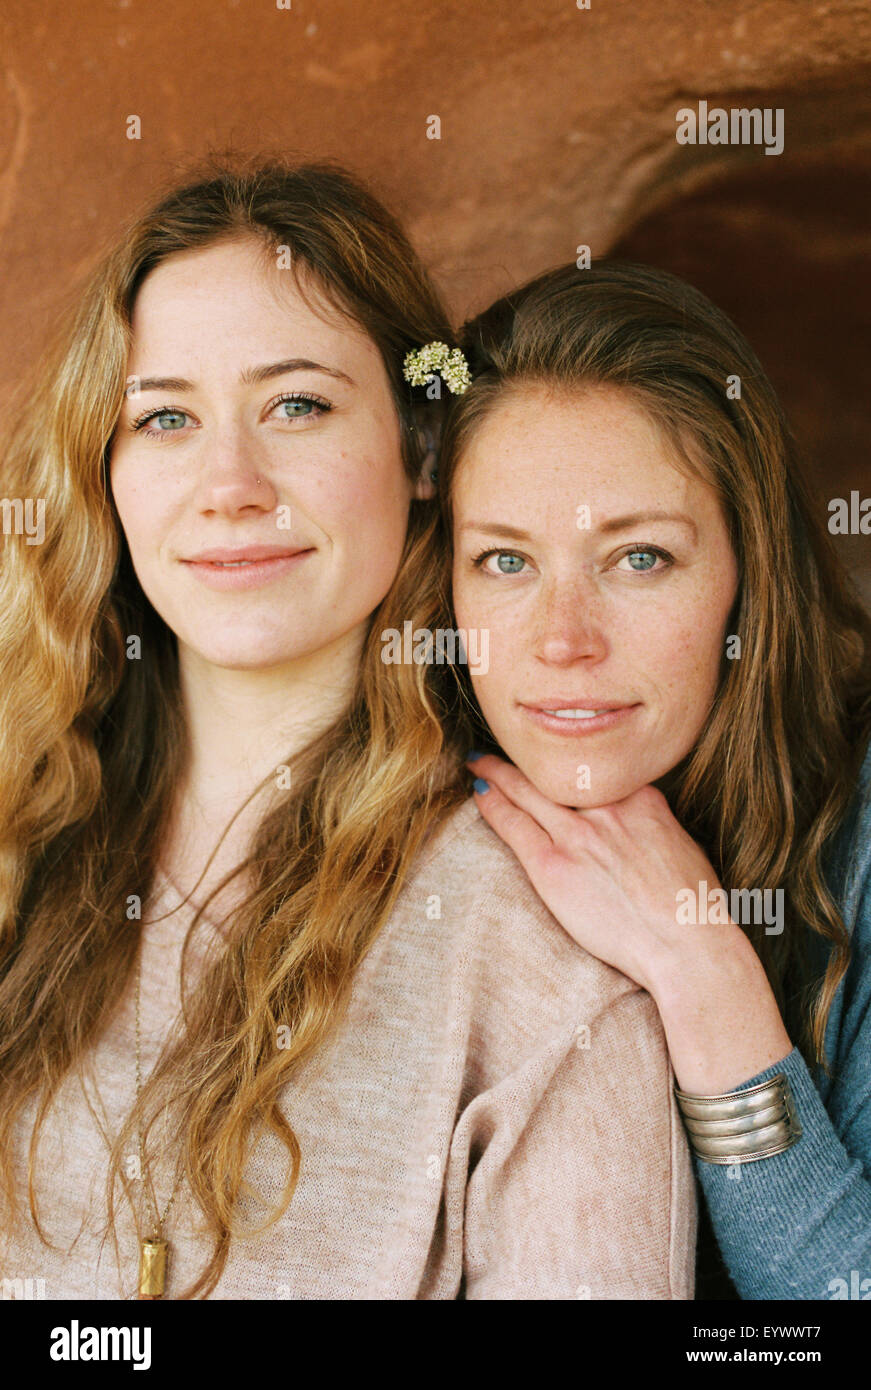 Two women side by side, smiling at the camera. Stock Photo